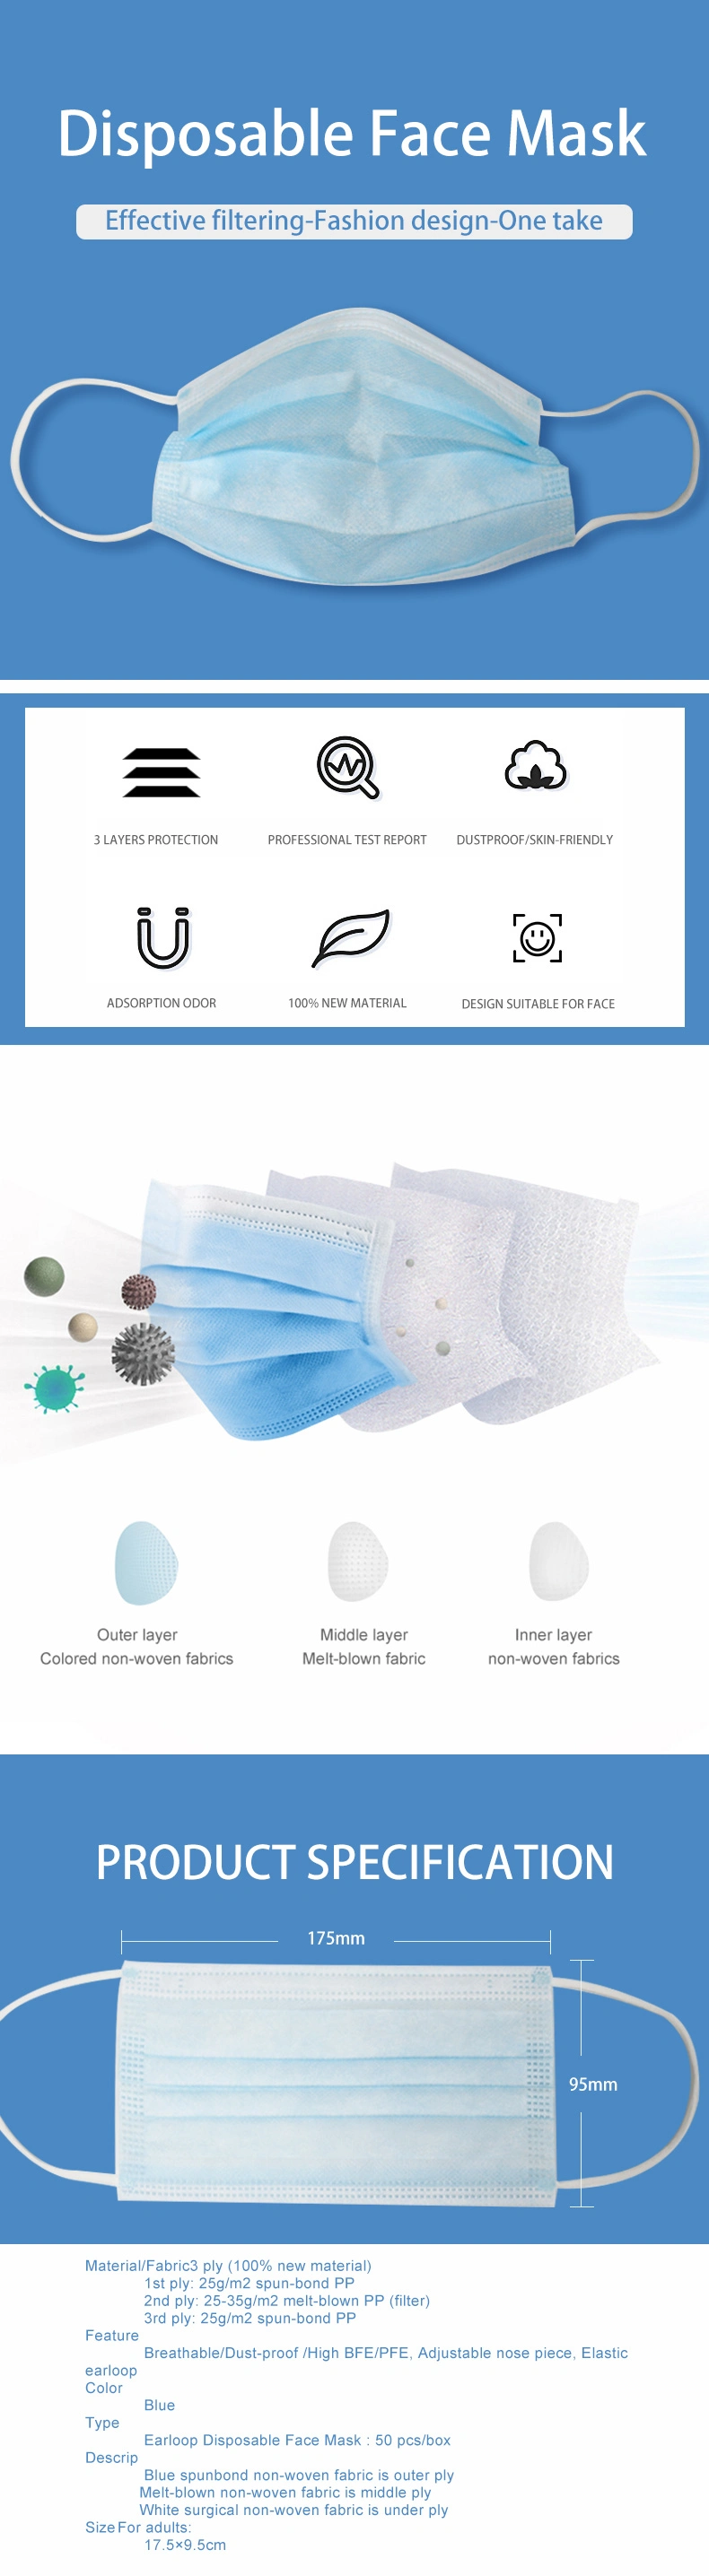 New Design Disposable Non Medical Blue Color Face Mask Test Equipment Earloop Mask Protective 3 Layer Face Mask 3 Ply Non Woven Bfe99 Disposable Face Mask